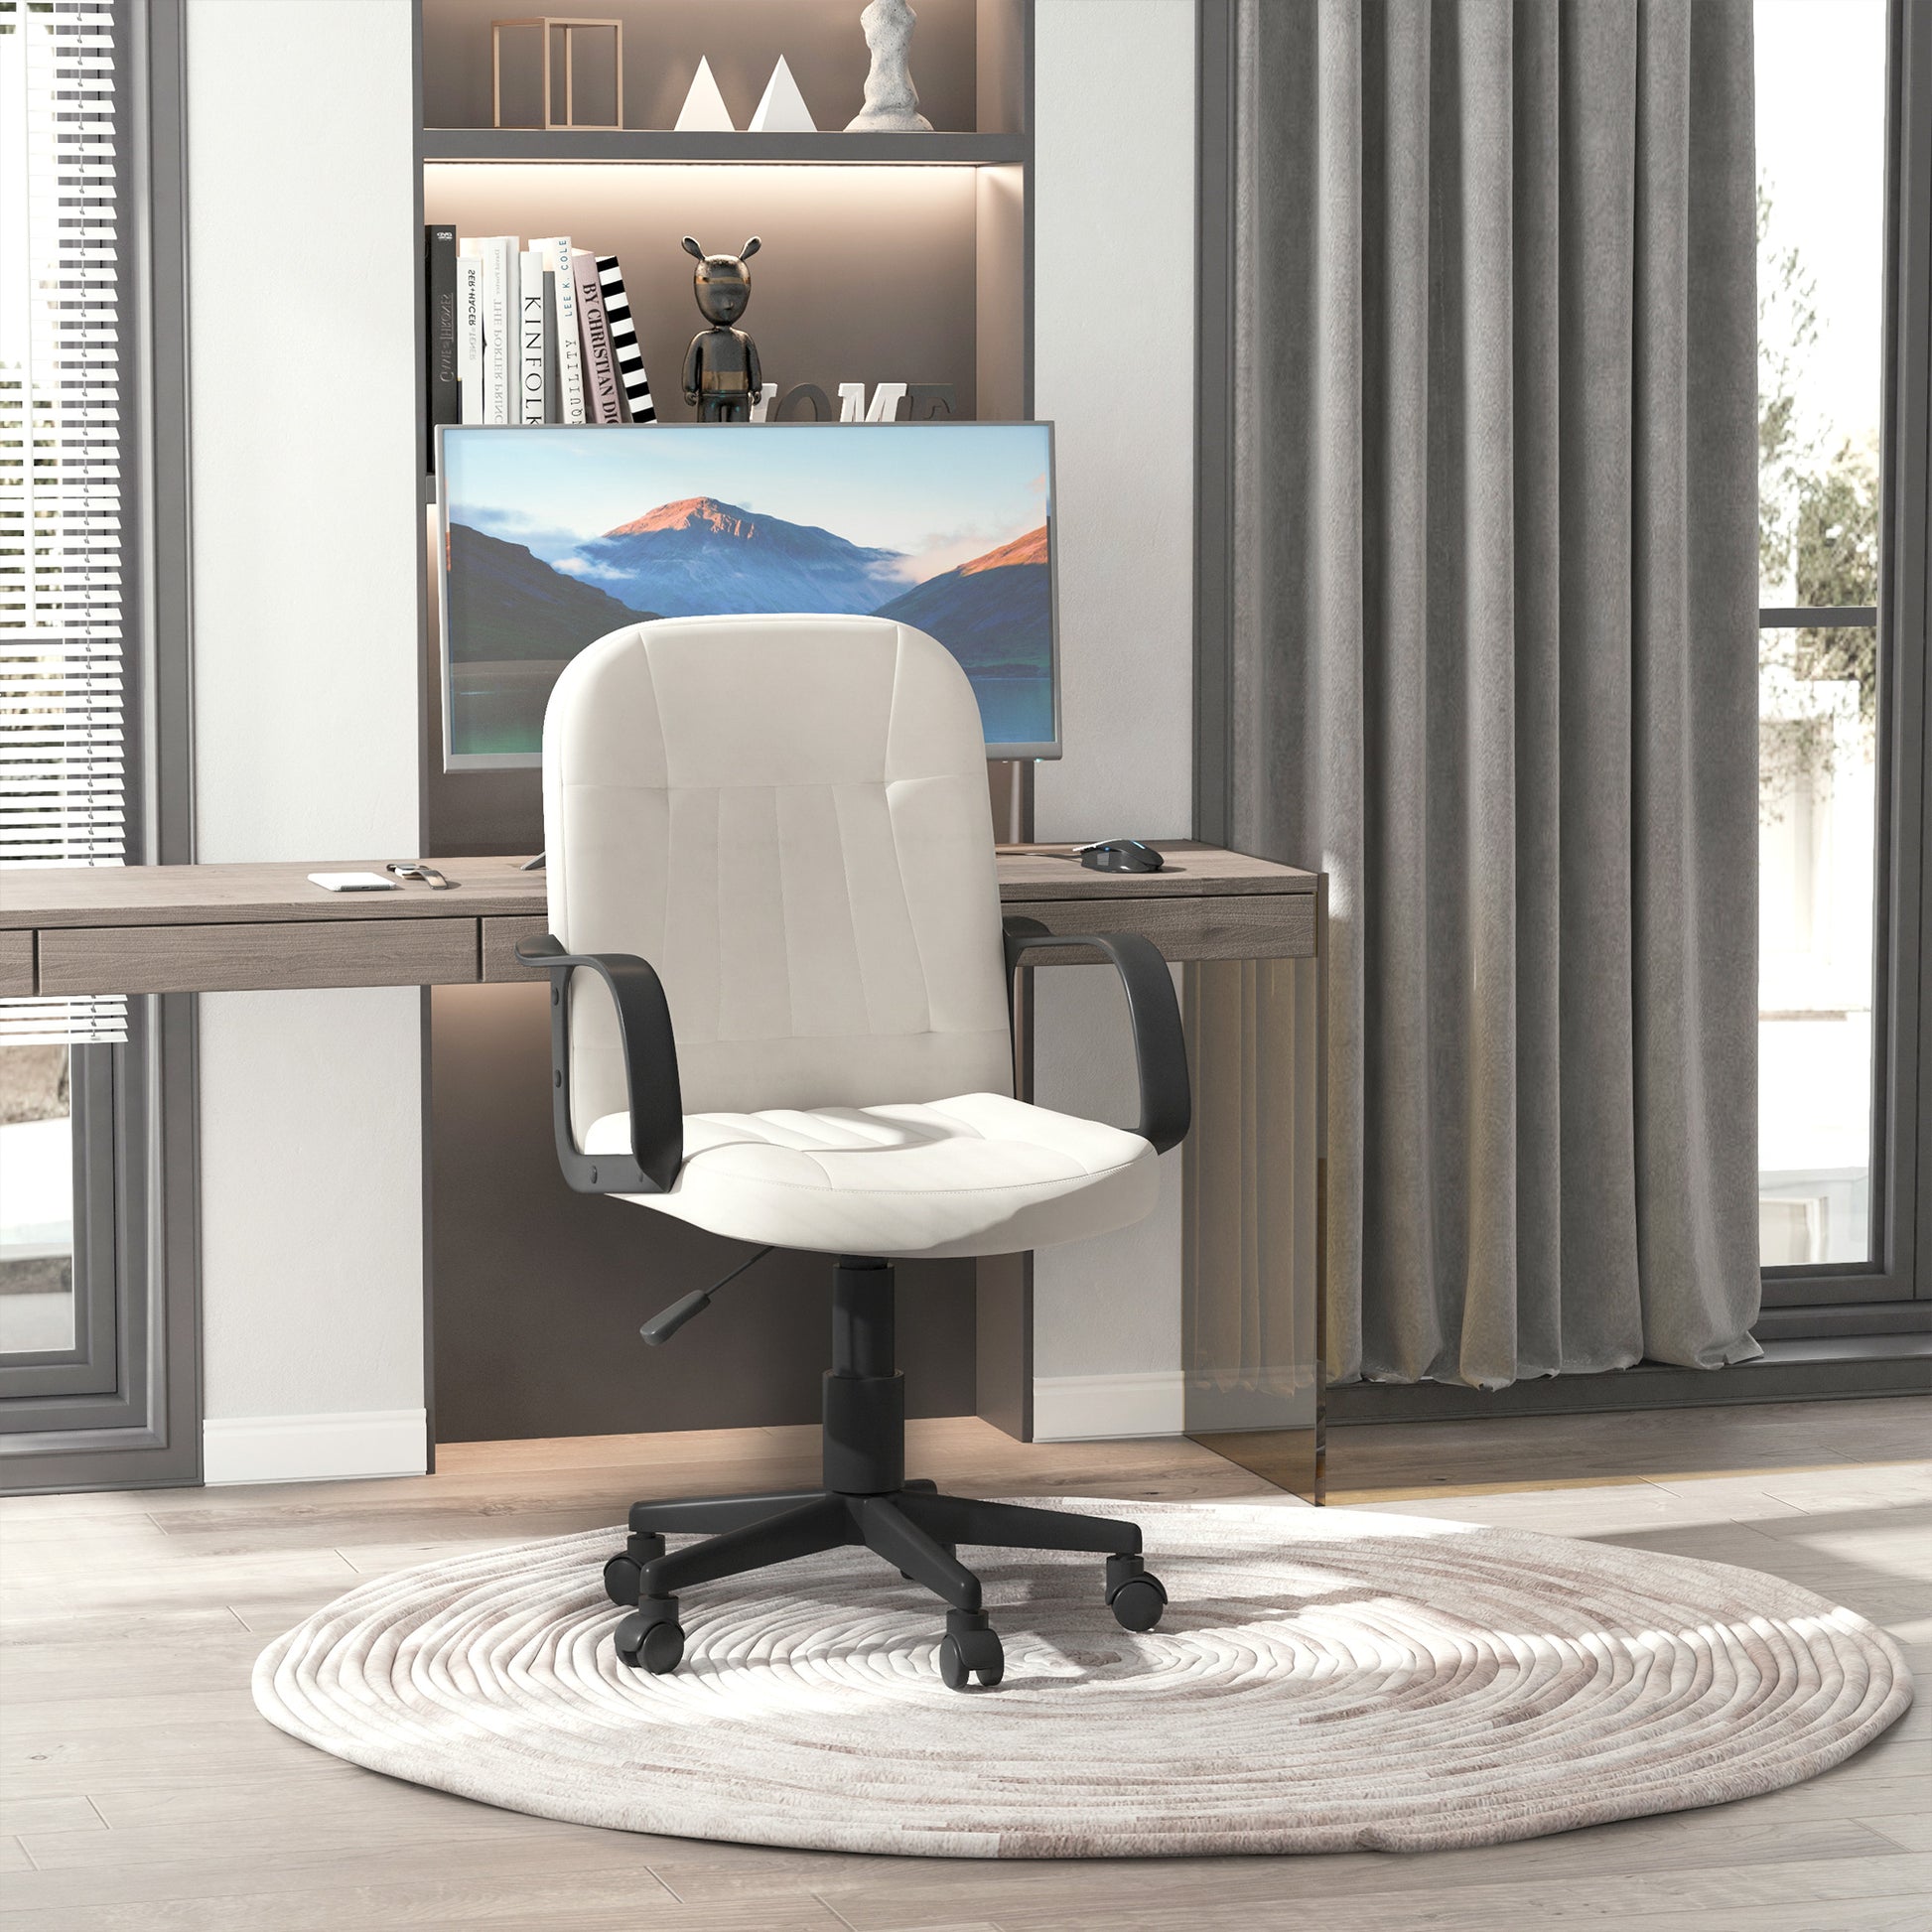 Swivel Executive Office Chair Home, Office Mid Back PU Leather Computer Desk Chair for Adults, Wheels, Cream, HOMCOM, 2